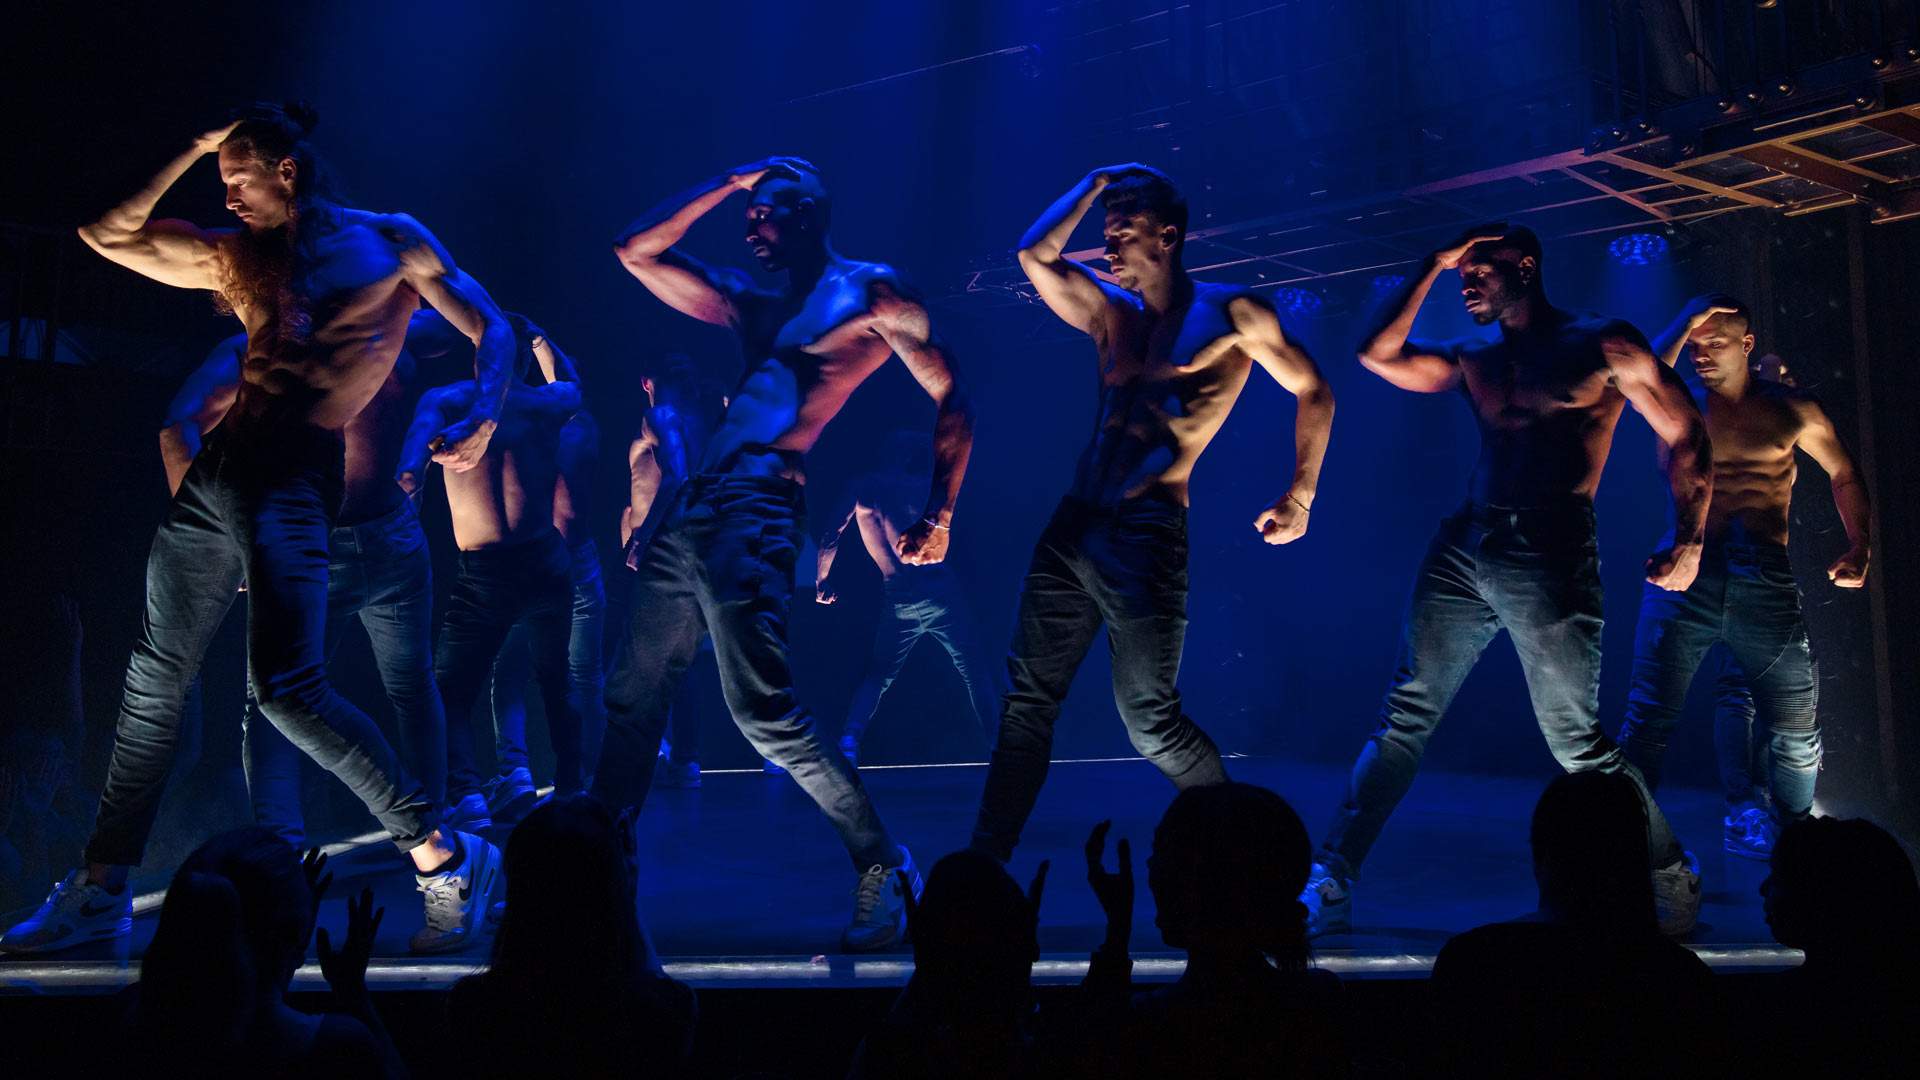 Channing Tatum's 'Magic Mike Live' Show Is Coming to Australia So You Can Relive the Movie IRL